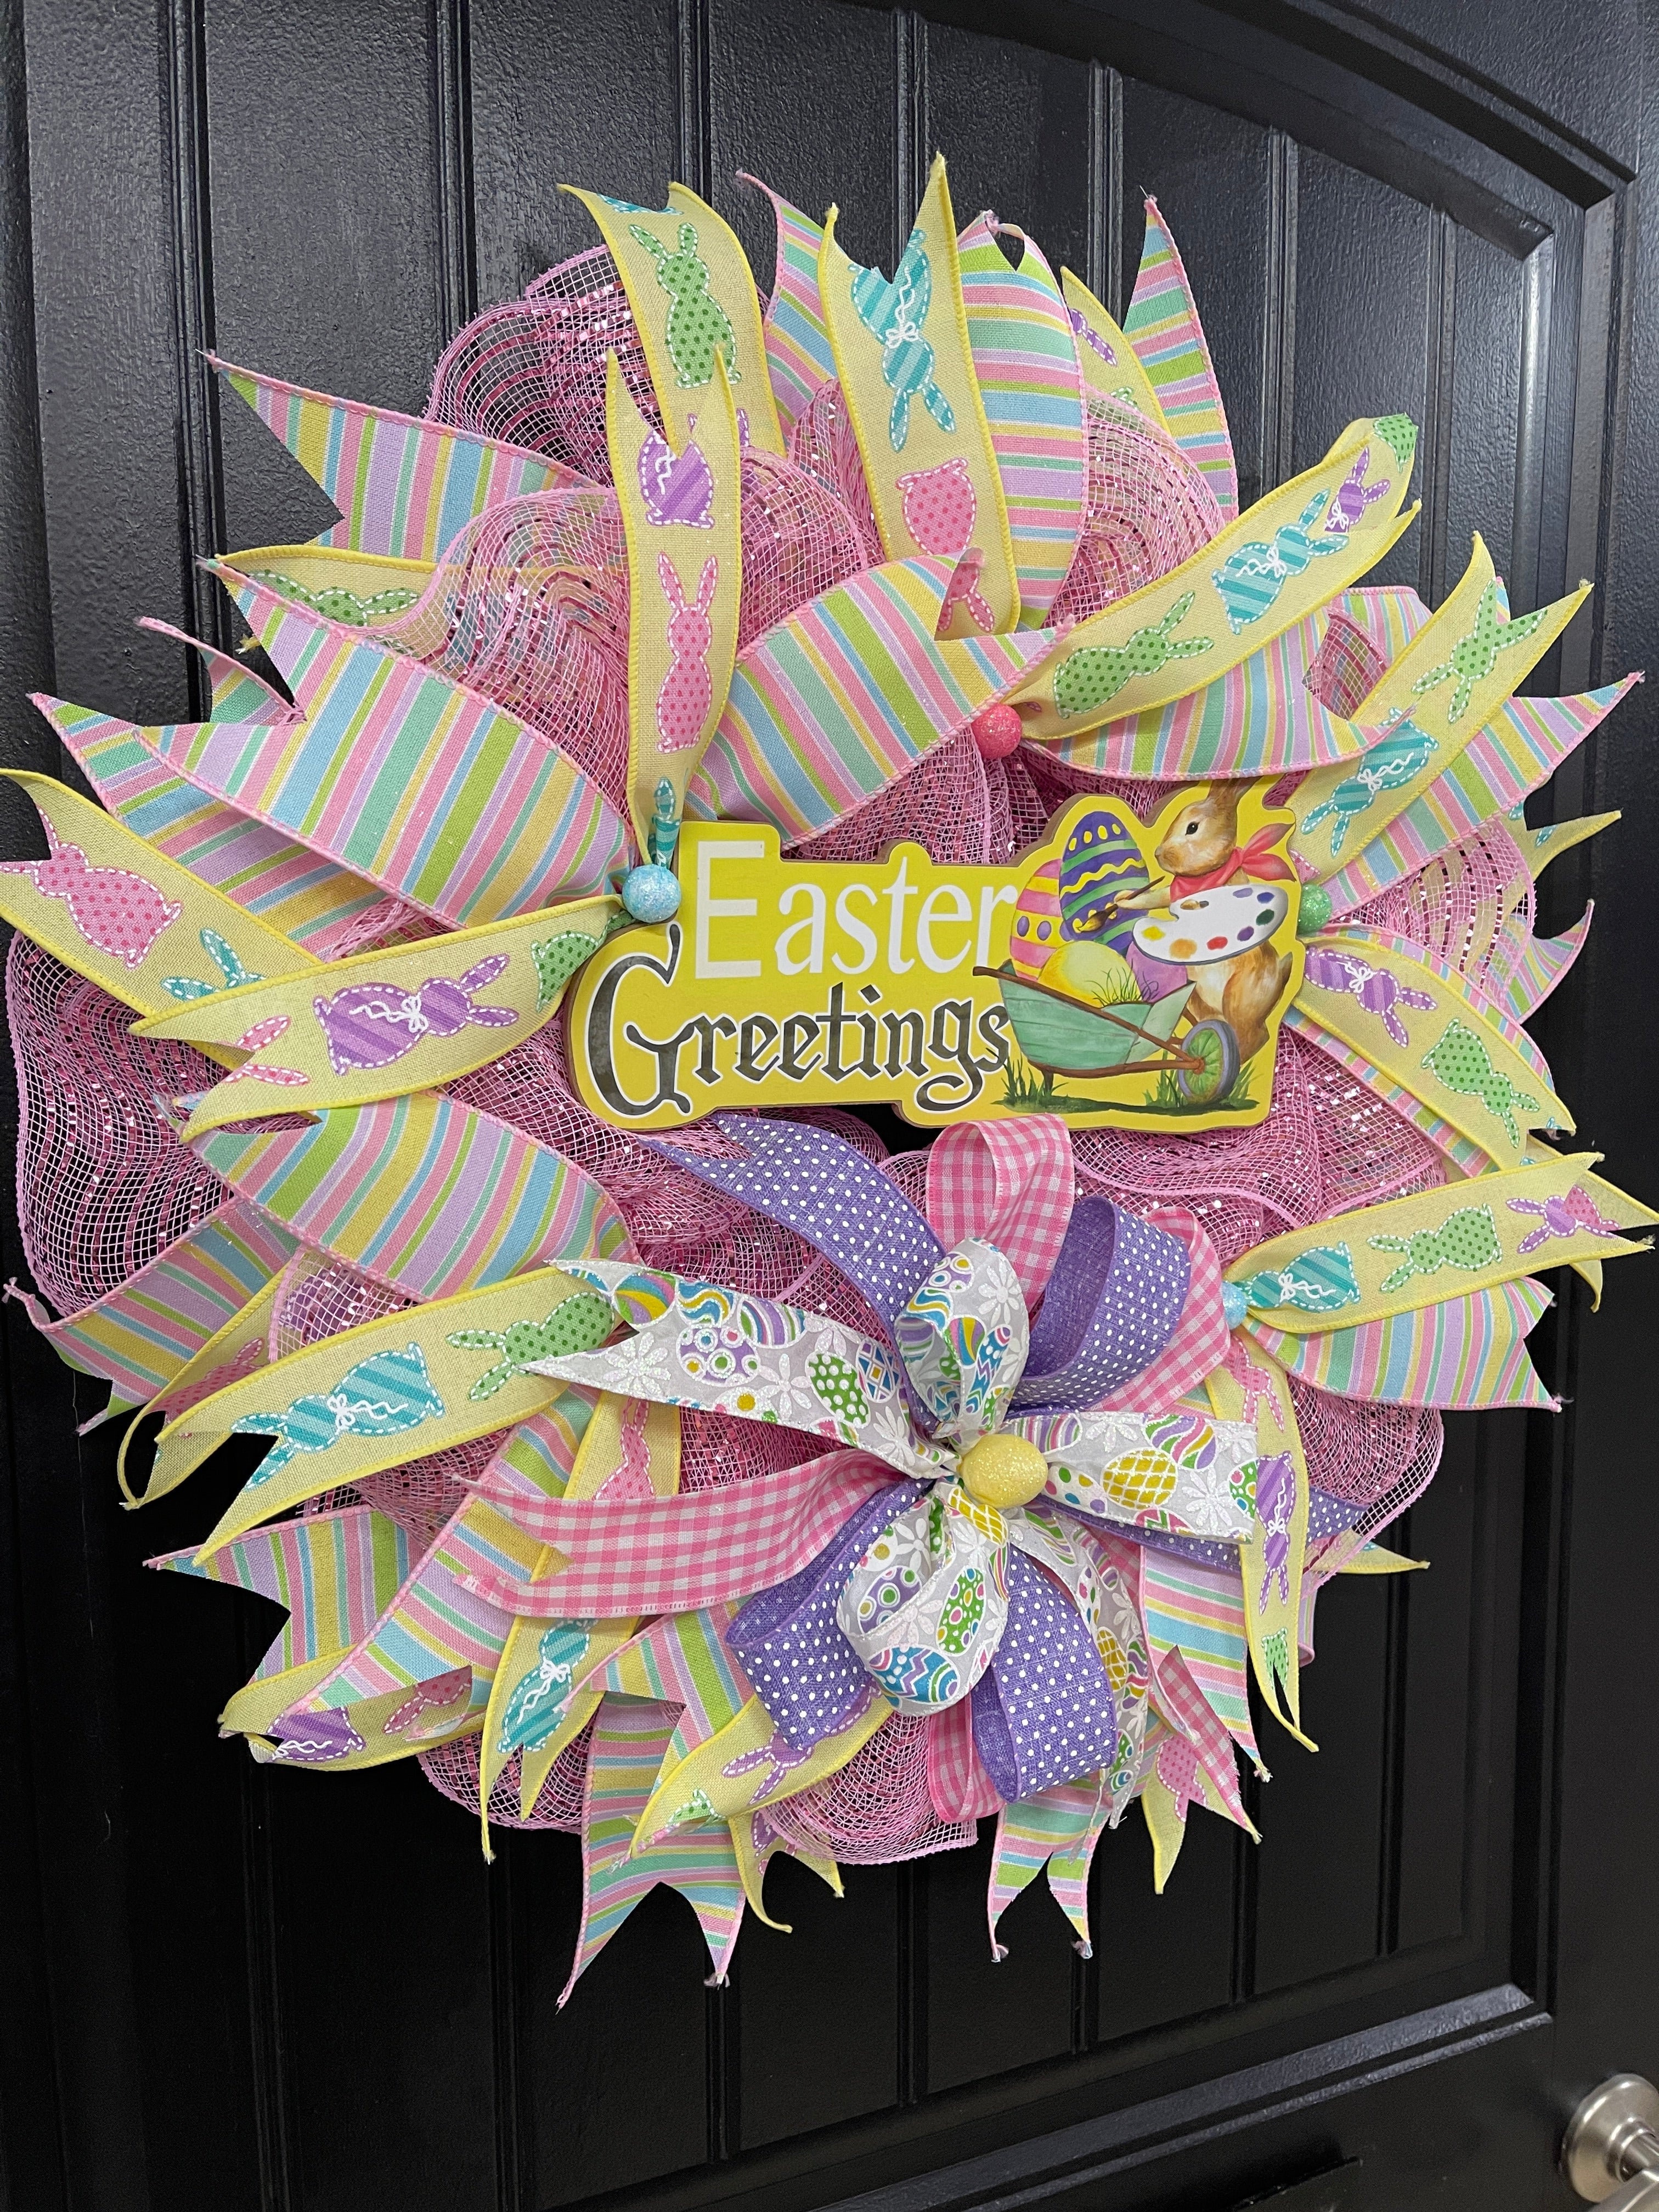 Left Side View of Easter Greetings Bunny Wreath with Pink, Yellow, Blue, Green and Purple Pastel Ribbons and Bows on a Black Door